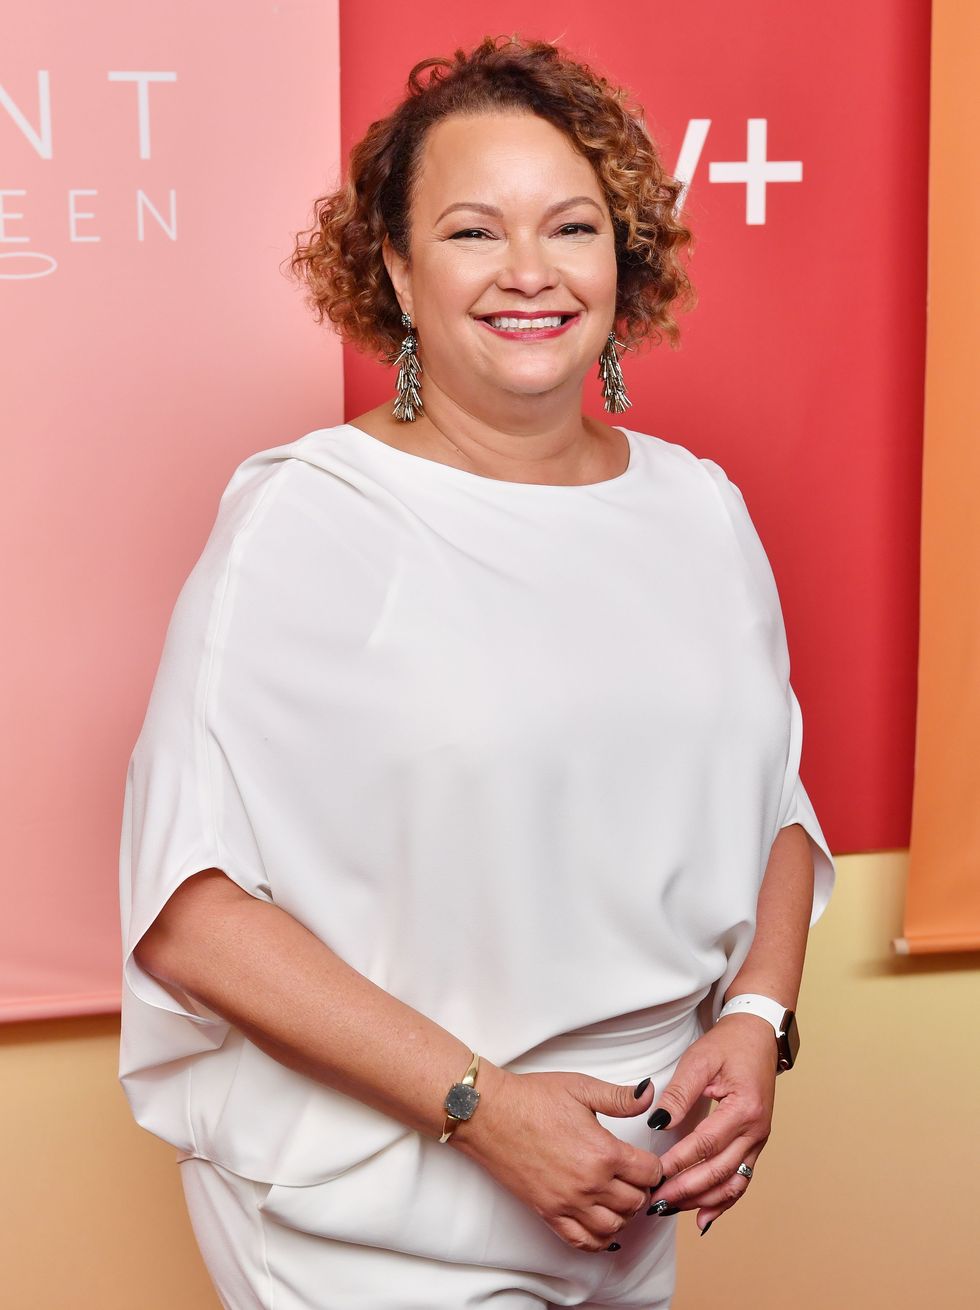 mandatory credit photo by stephen lovekinshutterstock 10425137d
in recognition of apples commitment to protecting the planet, lisa jackson, attends the premiere of apples acclaimed documentary, the elephant queen, at the metrograph in new york on september 25, 2019
premiere of apples acclaimed documentary the elephant queen, new york, usa   25 sep 2019